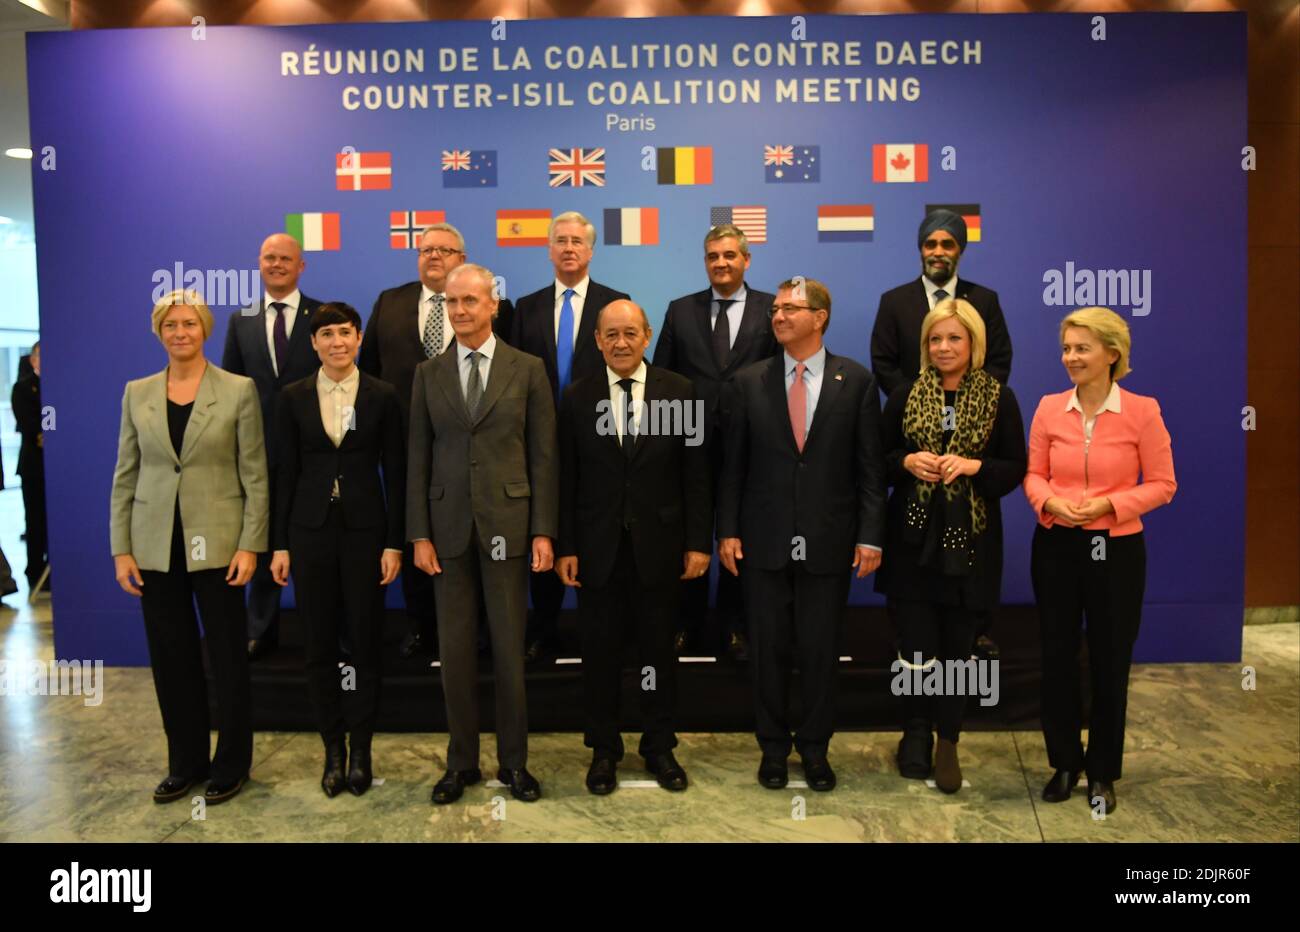 French Minister of Defence Jean-Yves Le Drian poses for a family photo with the Defence Ministers of the Coalition in Iraq and Syria, Ashton Carter (USA), Michael Fallon (UK), Jeanine Hennis-Plasschaert (Netherlands), Marise Payne (Australia), Roberta Pinotti (Italy), Ursula Von Der Leyen (Germany), Pedro Morenes (Spain), Peter Christensen (Denmark), Ine Marie Eriksen Soreide (Norway), Steven Vandeput (Belgium), Gerry Brownlee (New Zealand) and Harjit Sajjan (Canada), during the opening of a Counter-ISIL Coalition Meeting held at the French Ministry of Defence's headquarters in Paris, France o Stock Photo